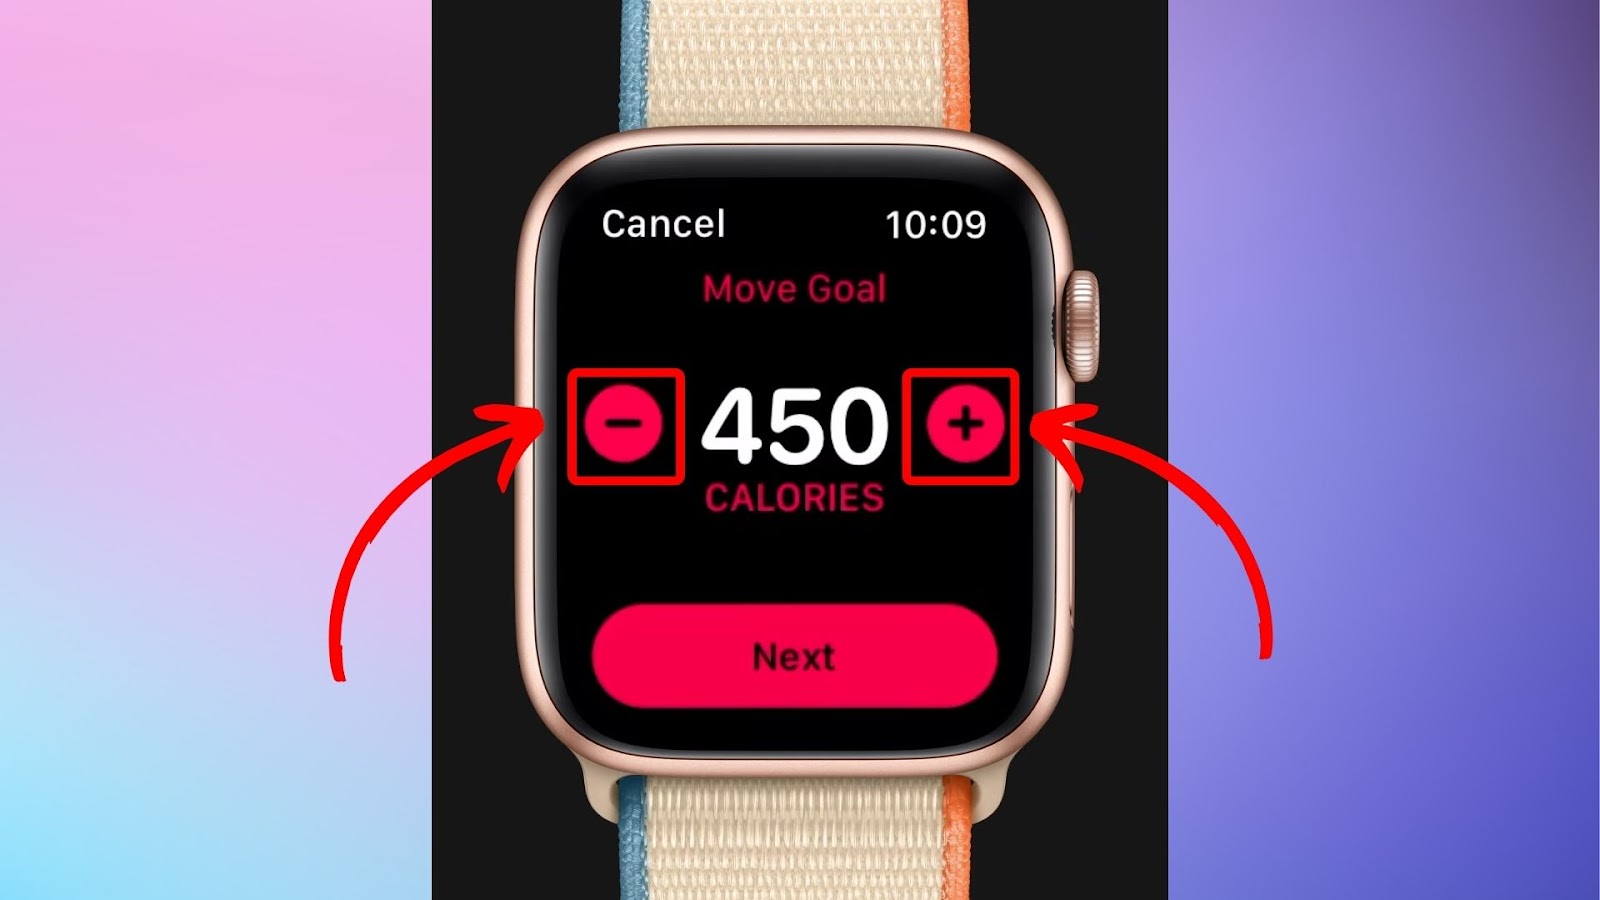 How to Input Number of Calories on Apple Watch